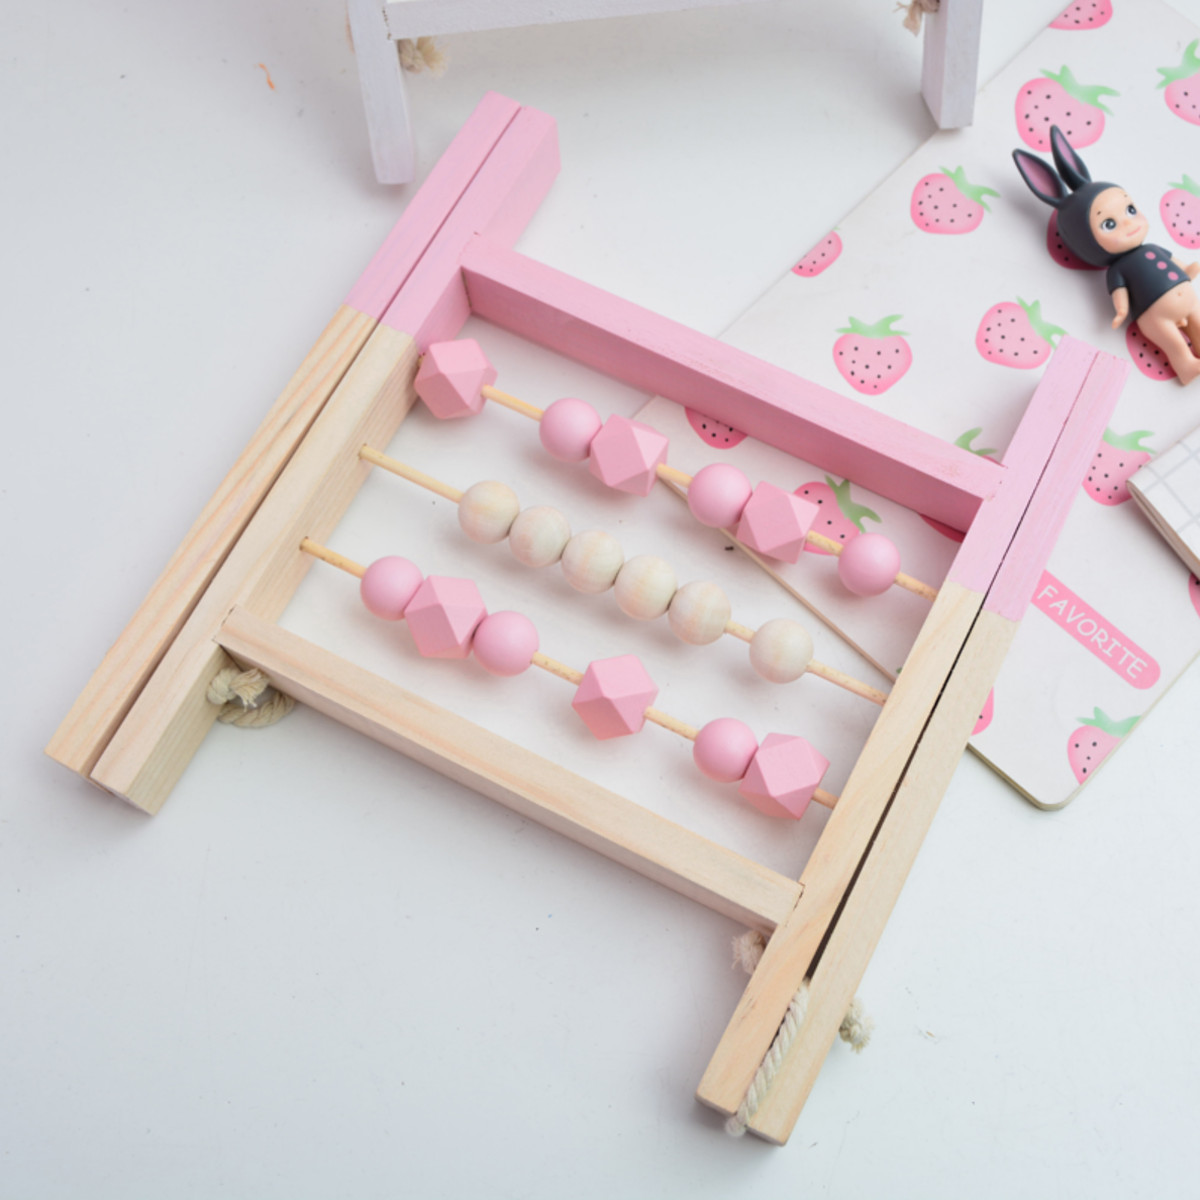 Natural-Pine-Nordic-Baby-Room-Decor-Wooden-Abacus-Educational-Nursery-Props-Toys-1581036-5